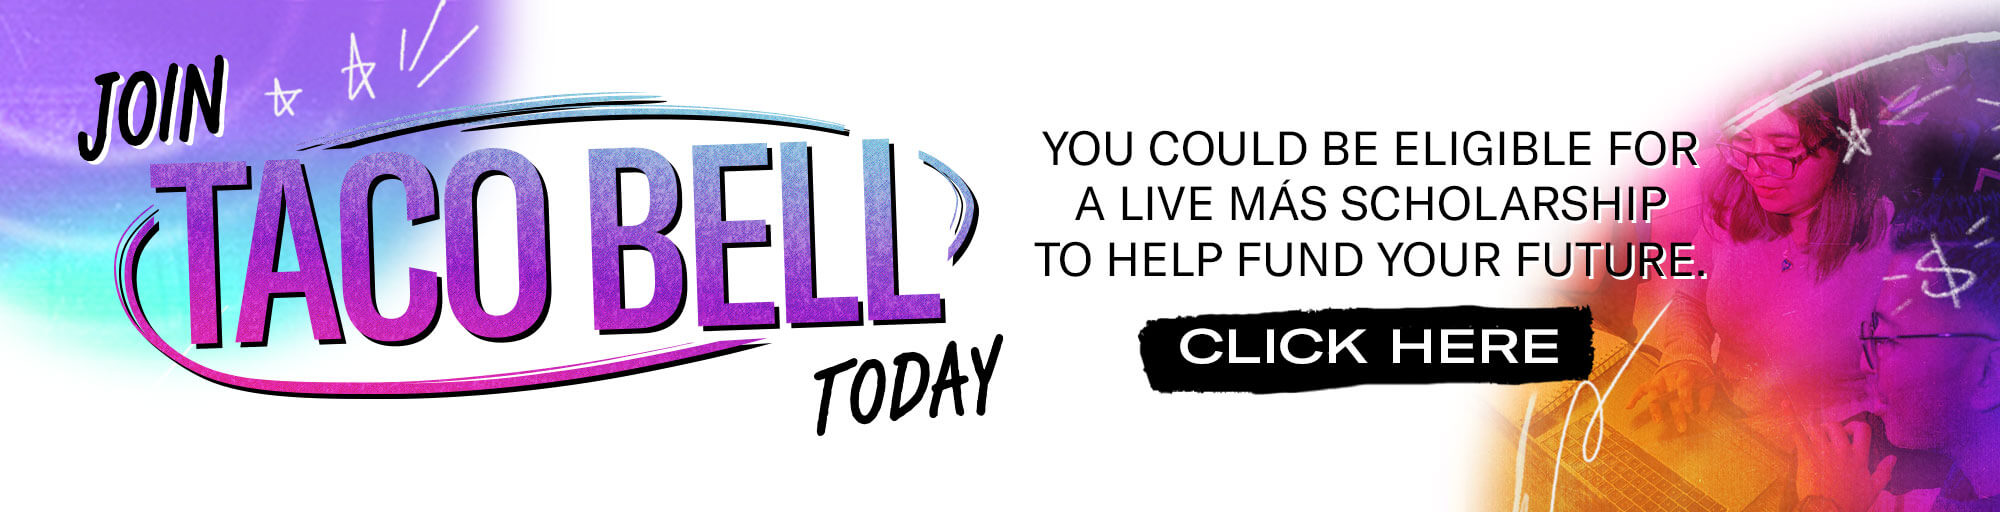 Join Taco Bell today. You could be eligible for a Live Más Scholarship to help fund your future. Click here.